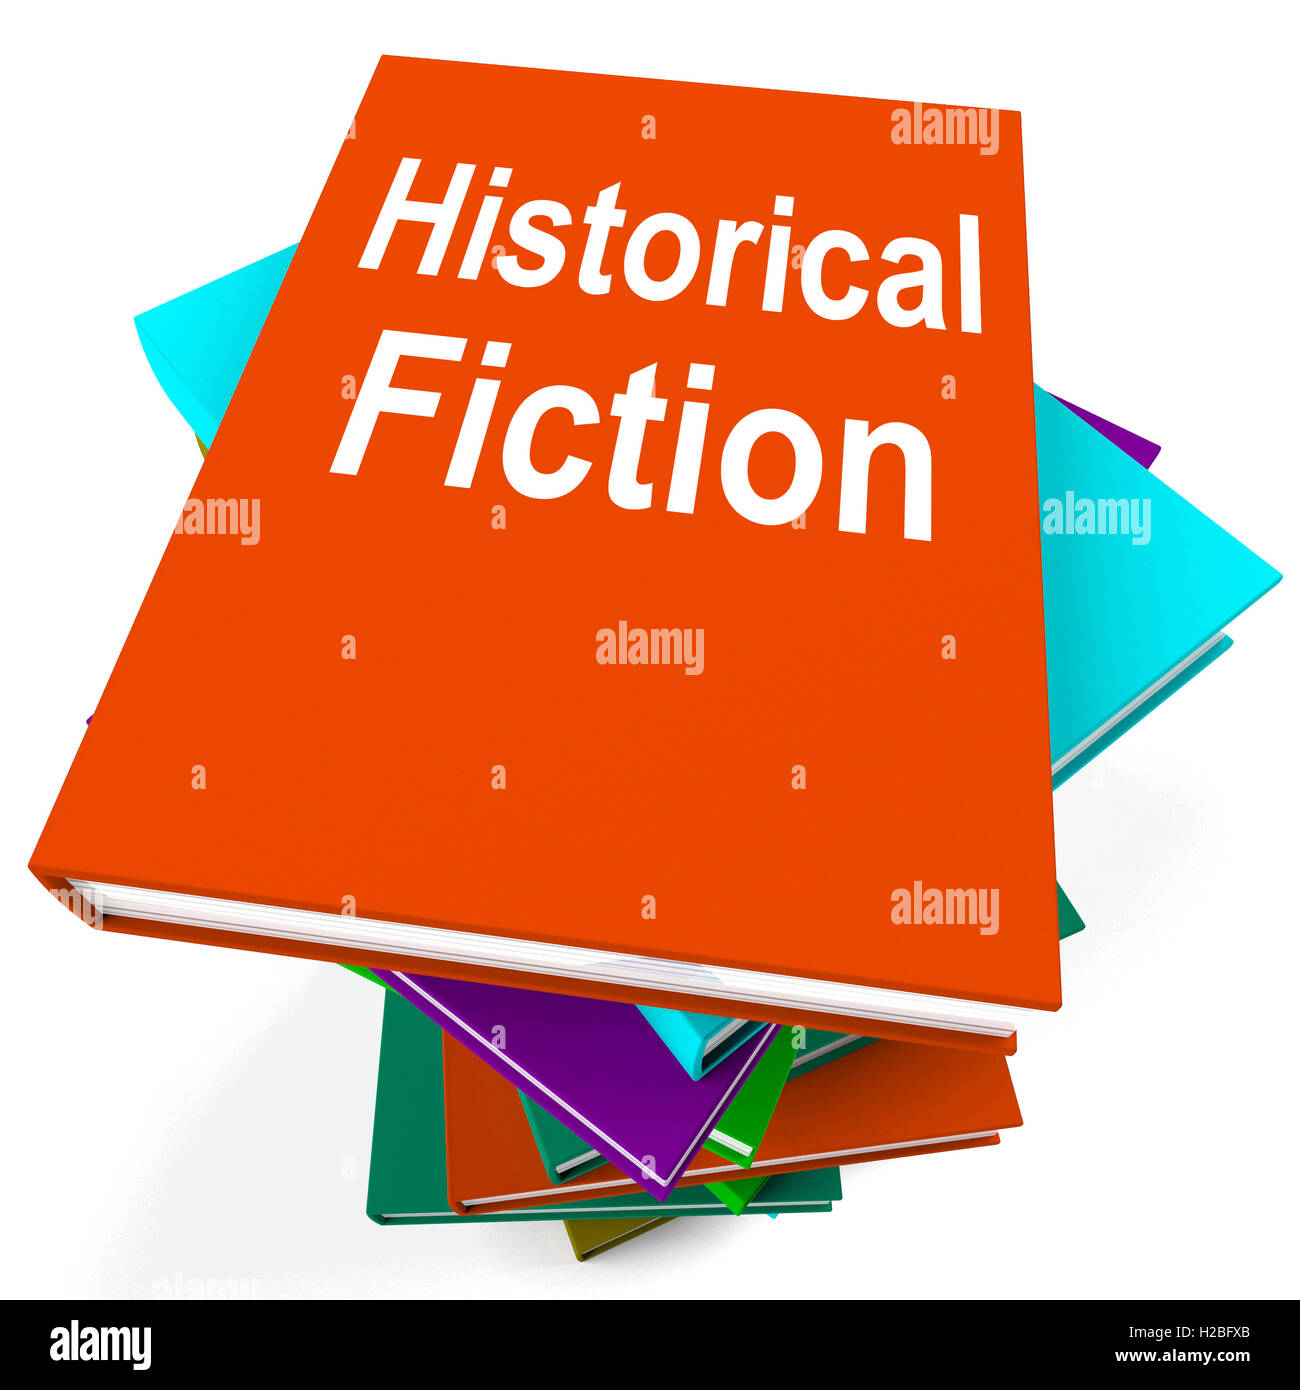 Historical Fiction Book Stack Means Books From History Stock Photo